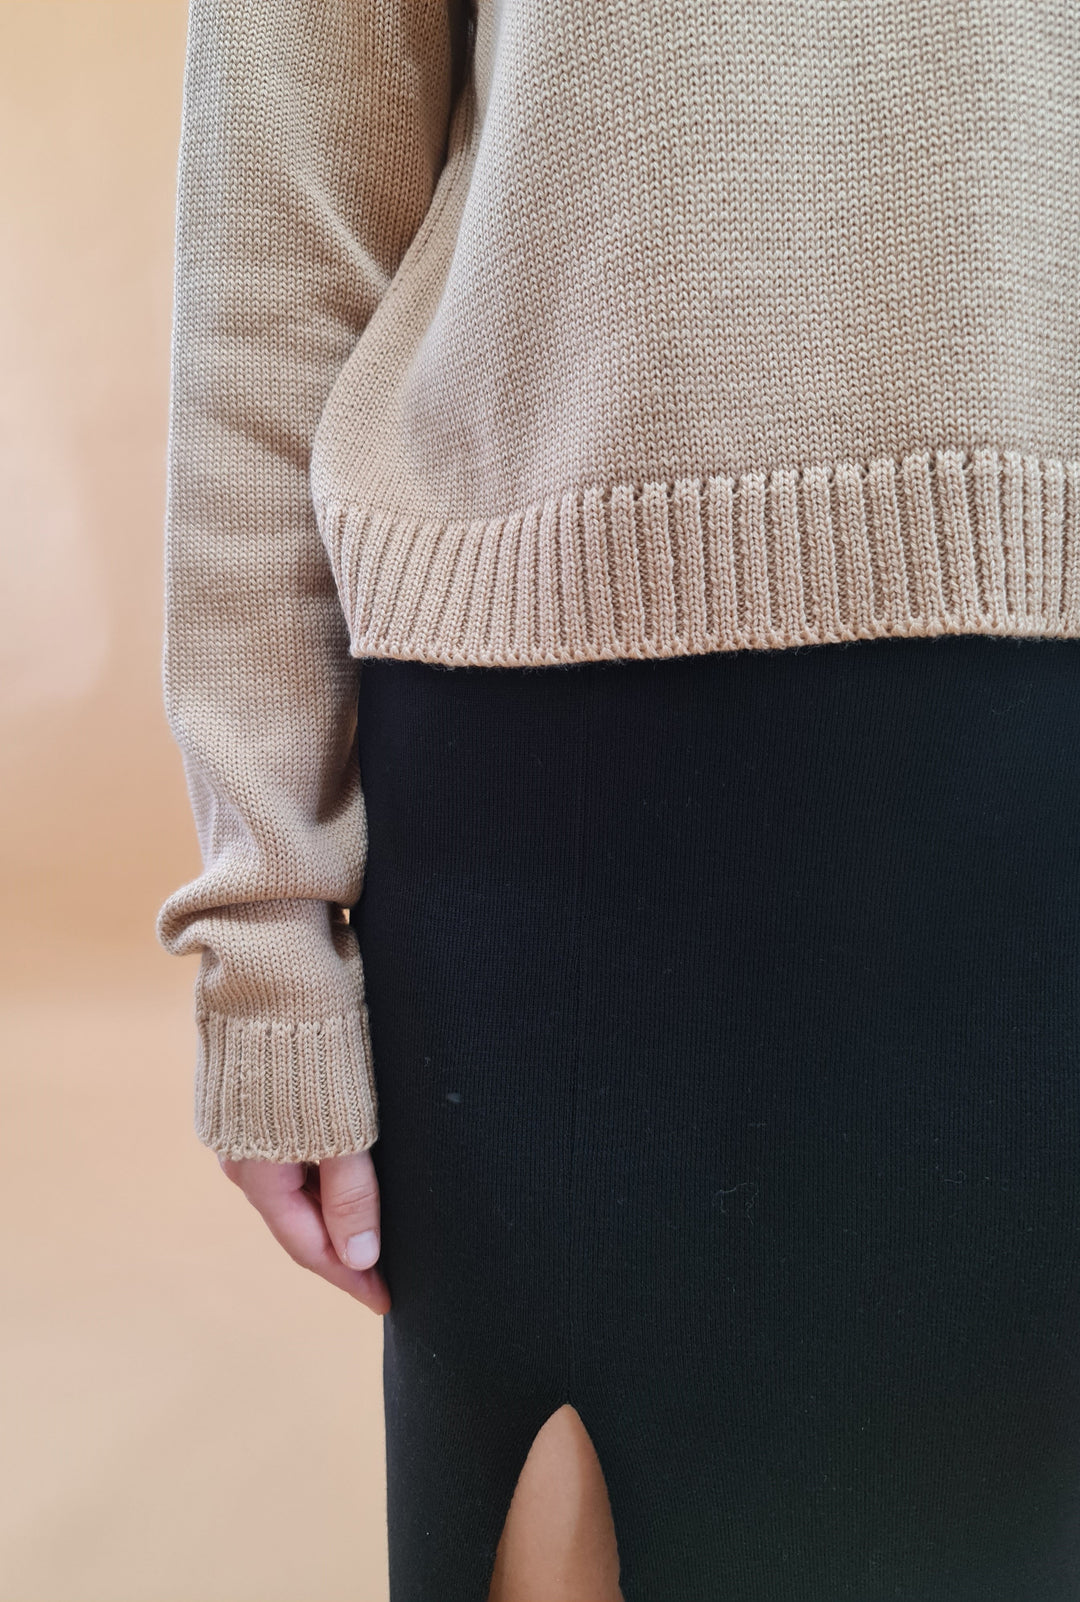 Close-up of woman wearing beige knit sweater and black skirt with side slit